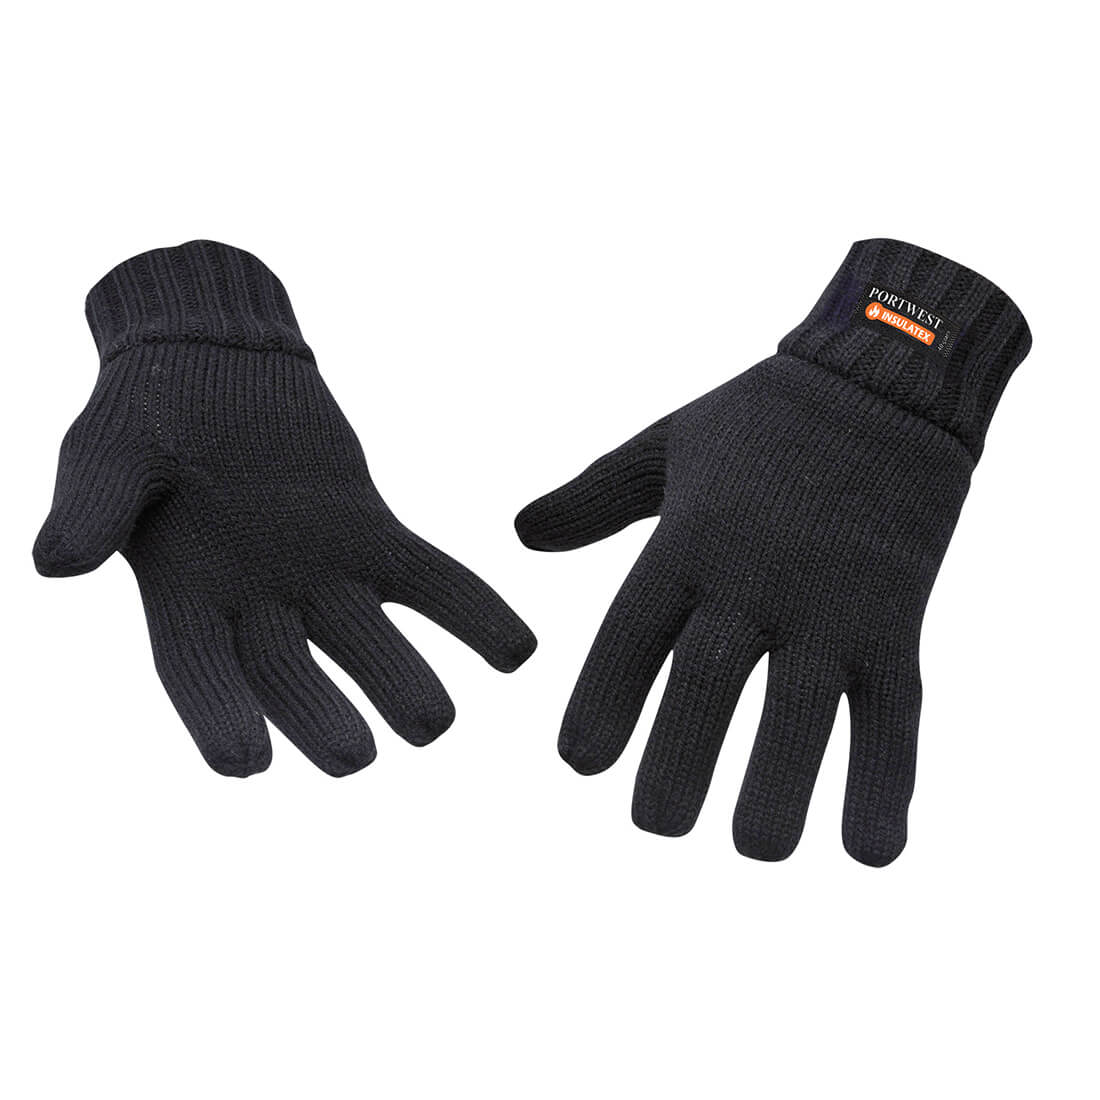 Image of Portwest Insulatex Lined Knit Gloves Black One Size